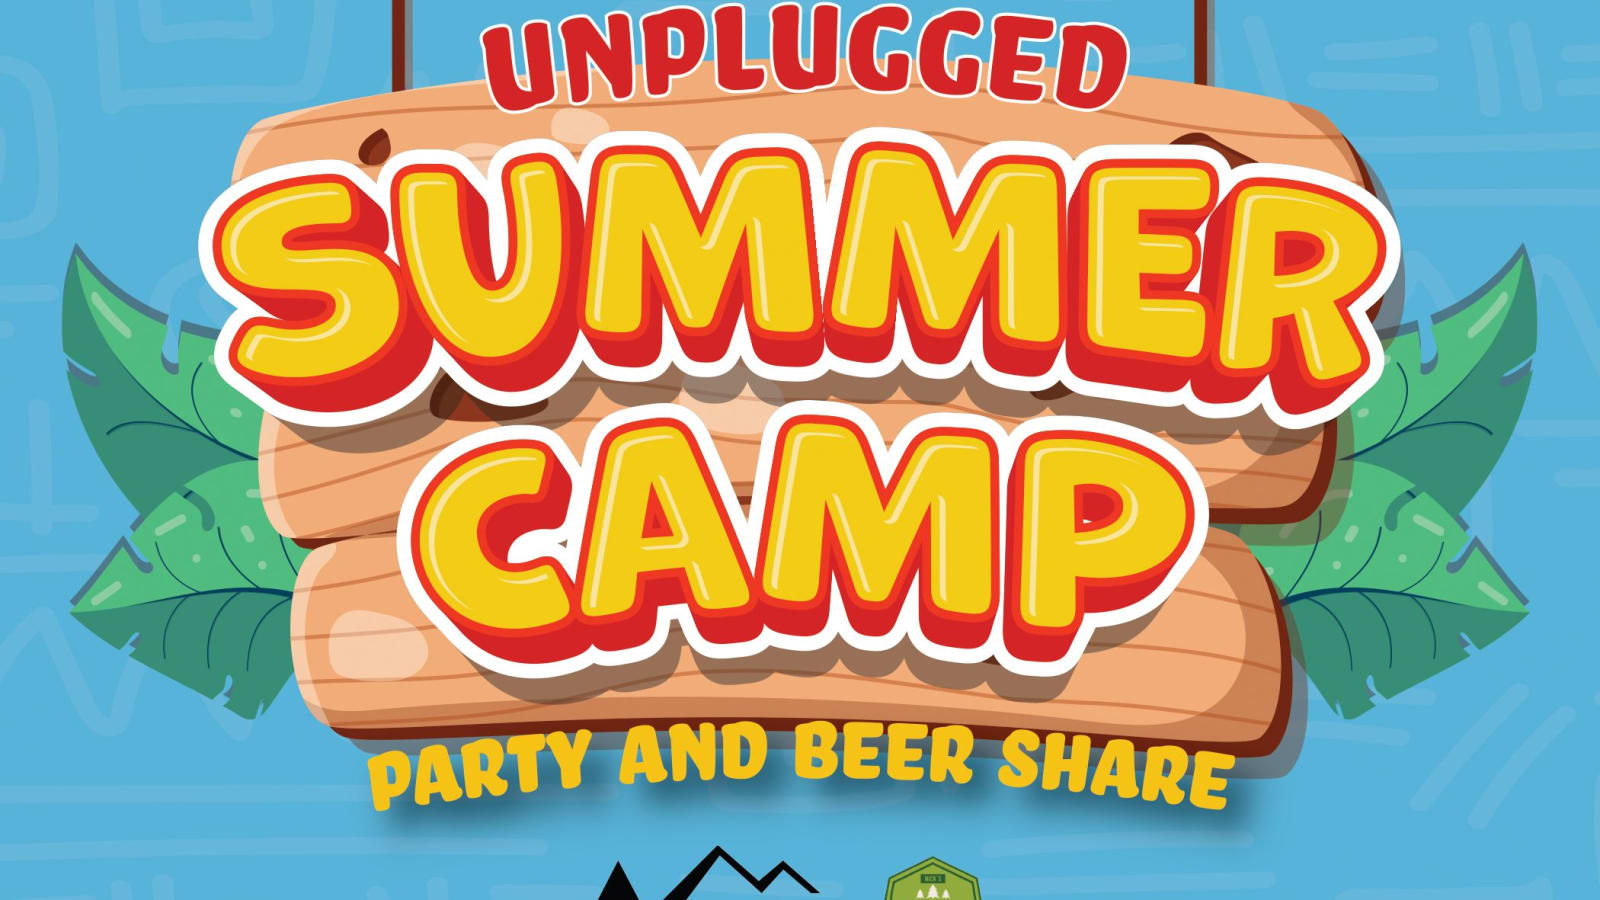 Unplugged Summer Camp Day Party + Beer Share